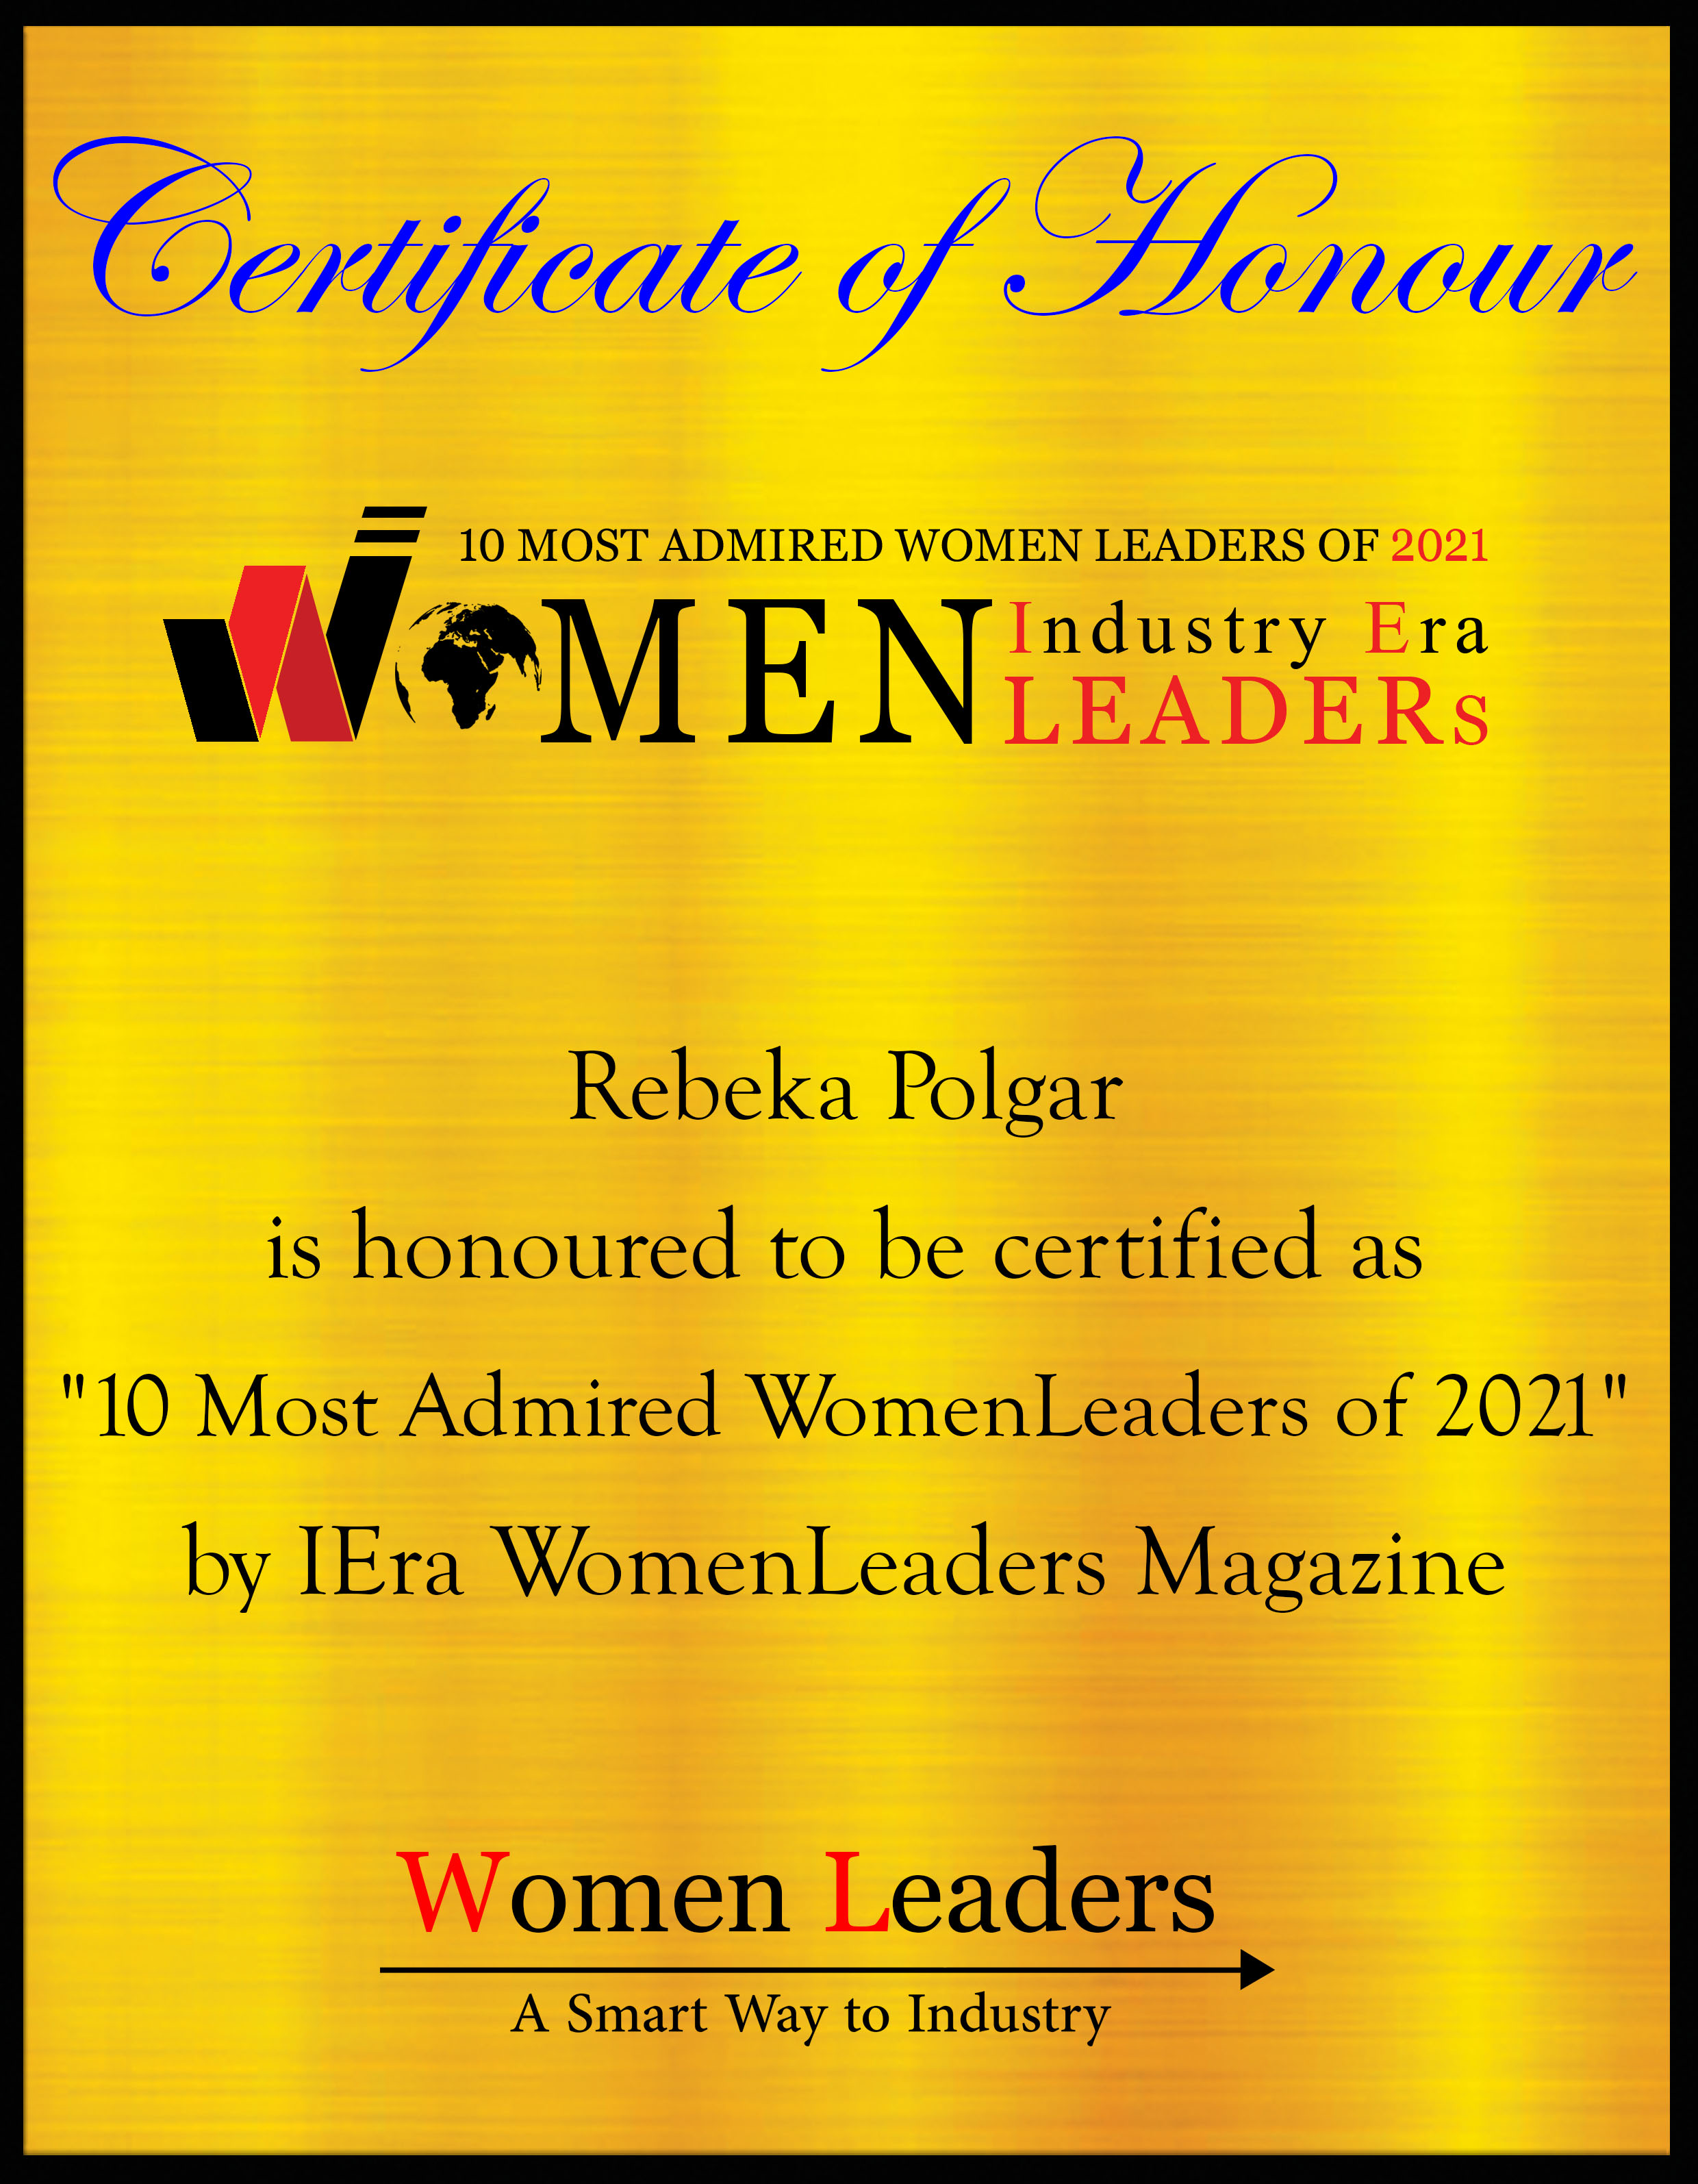 Rebeka Polgar, Director Of Finance And Operations at CDG, Most Admired WomenLeaders of 2021